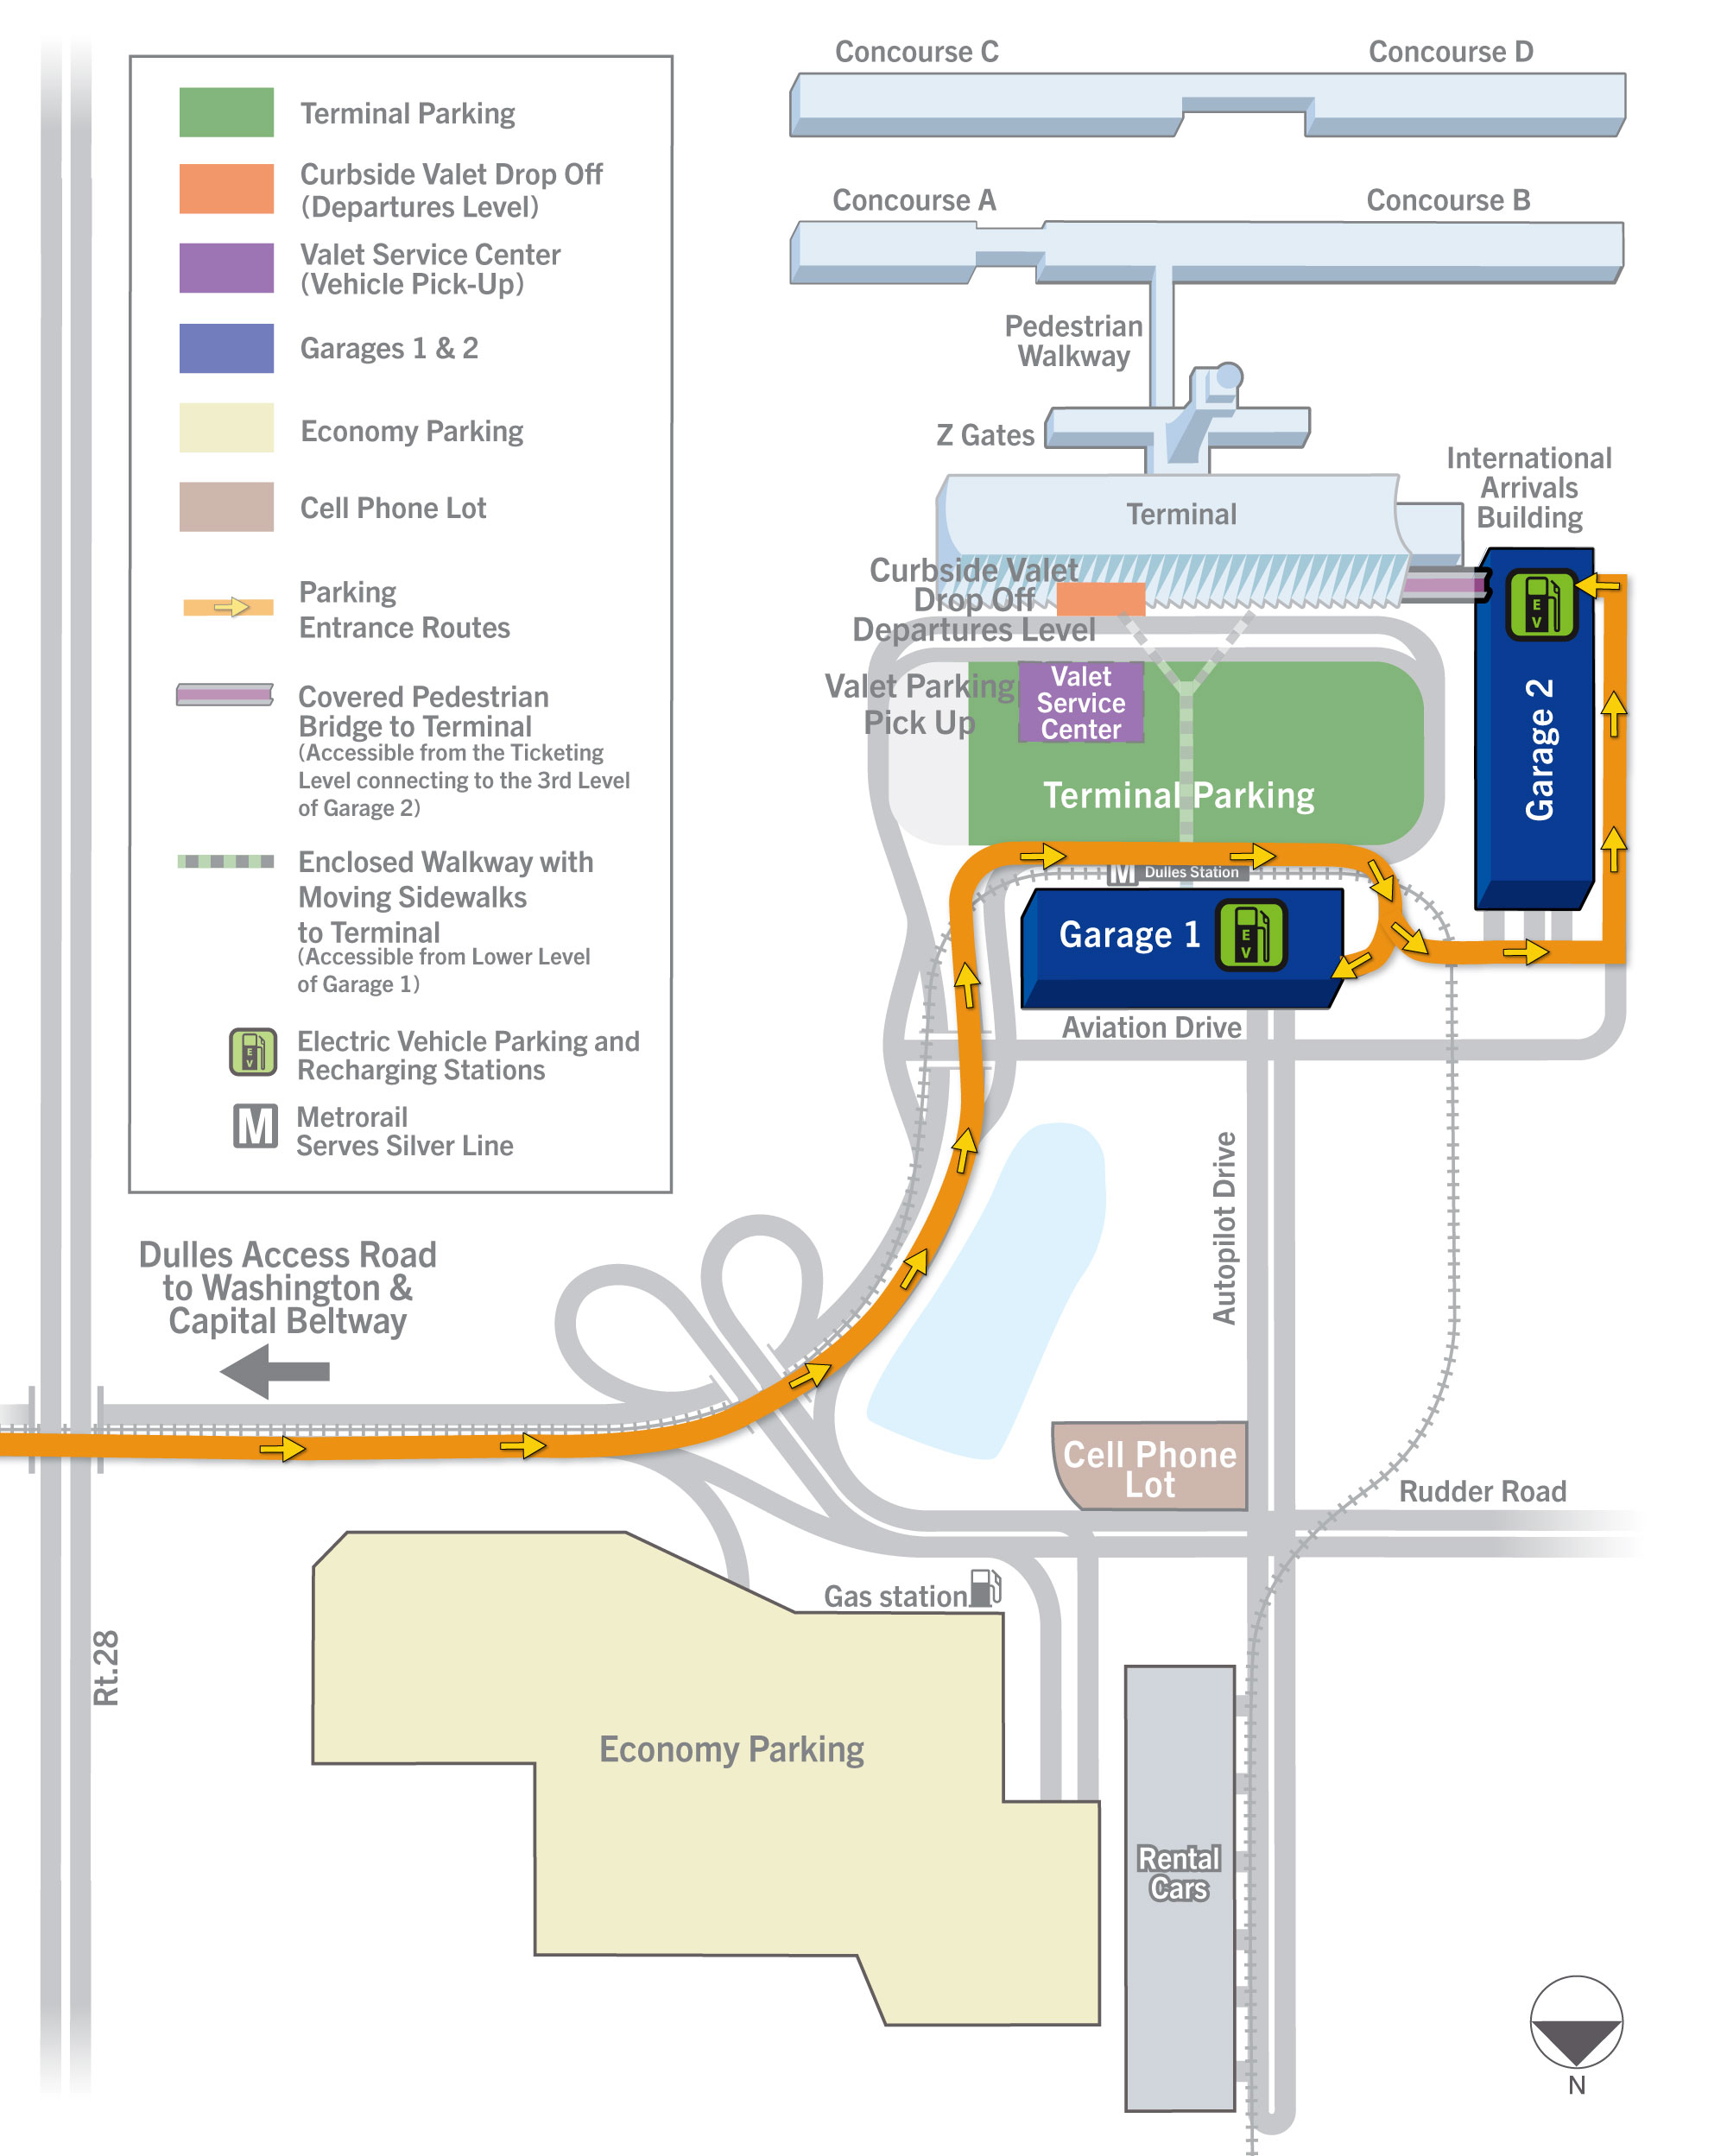 Map showing parking facility locations.